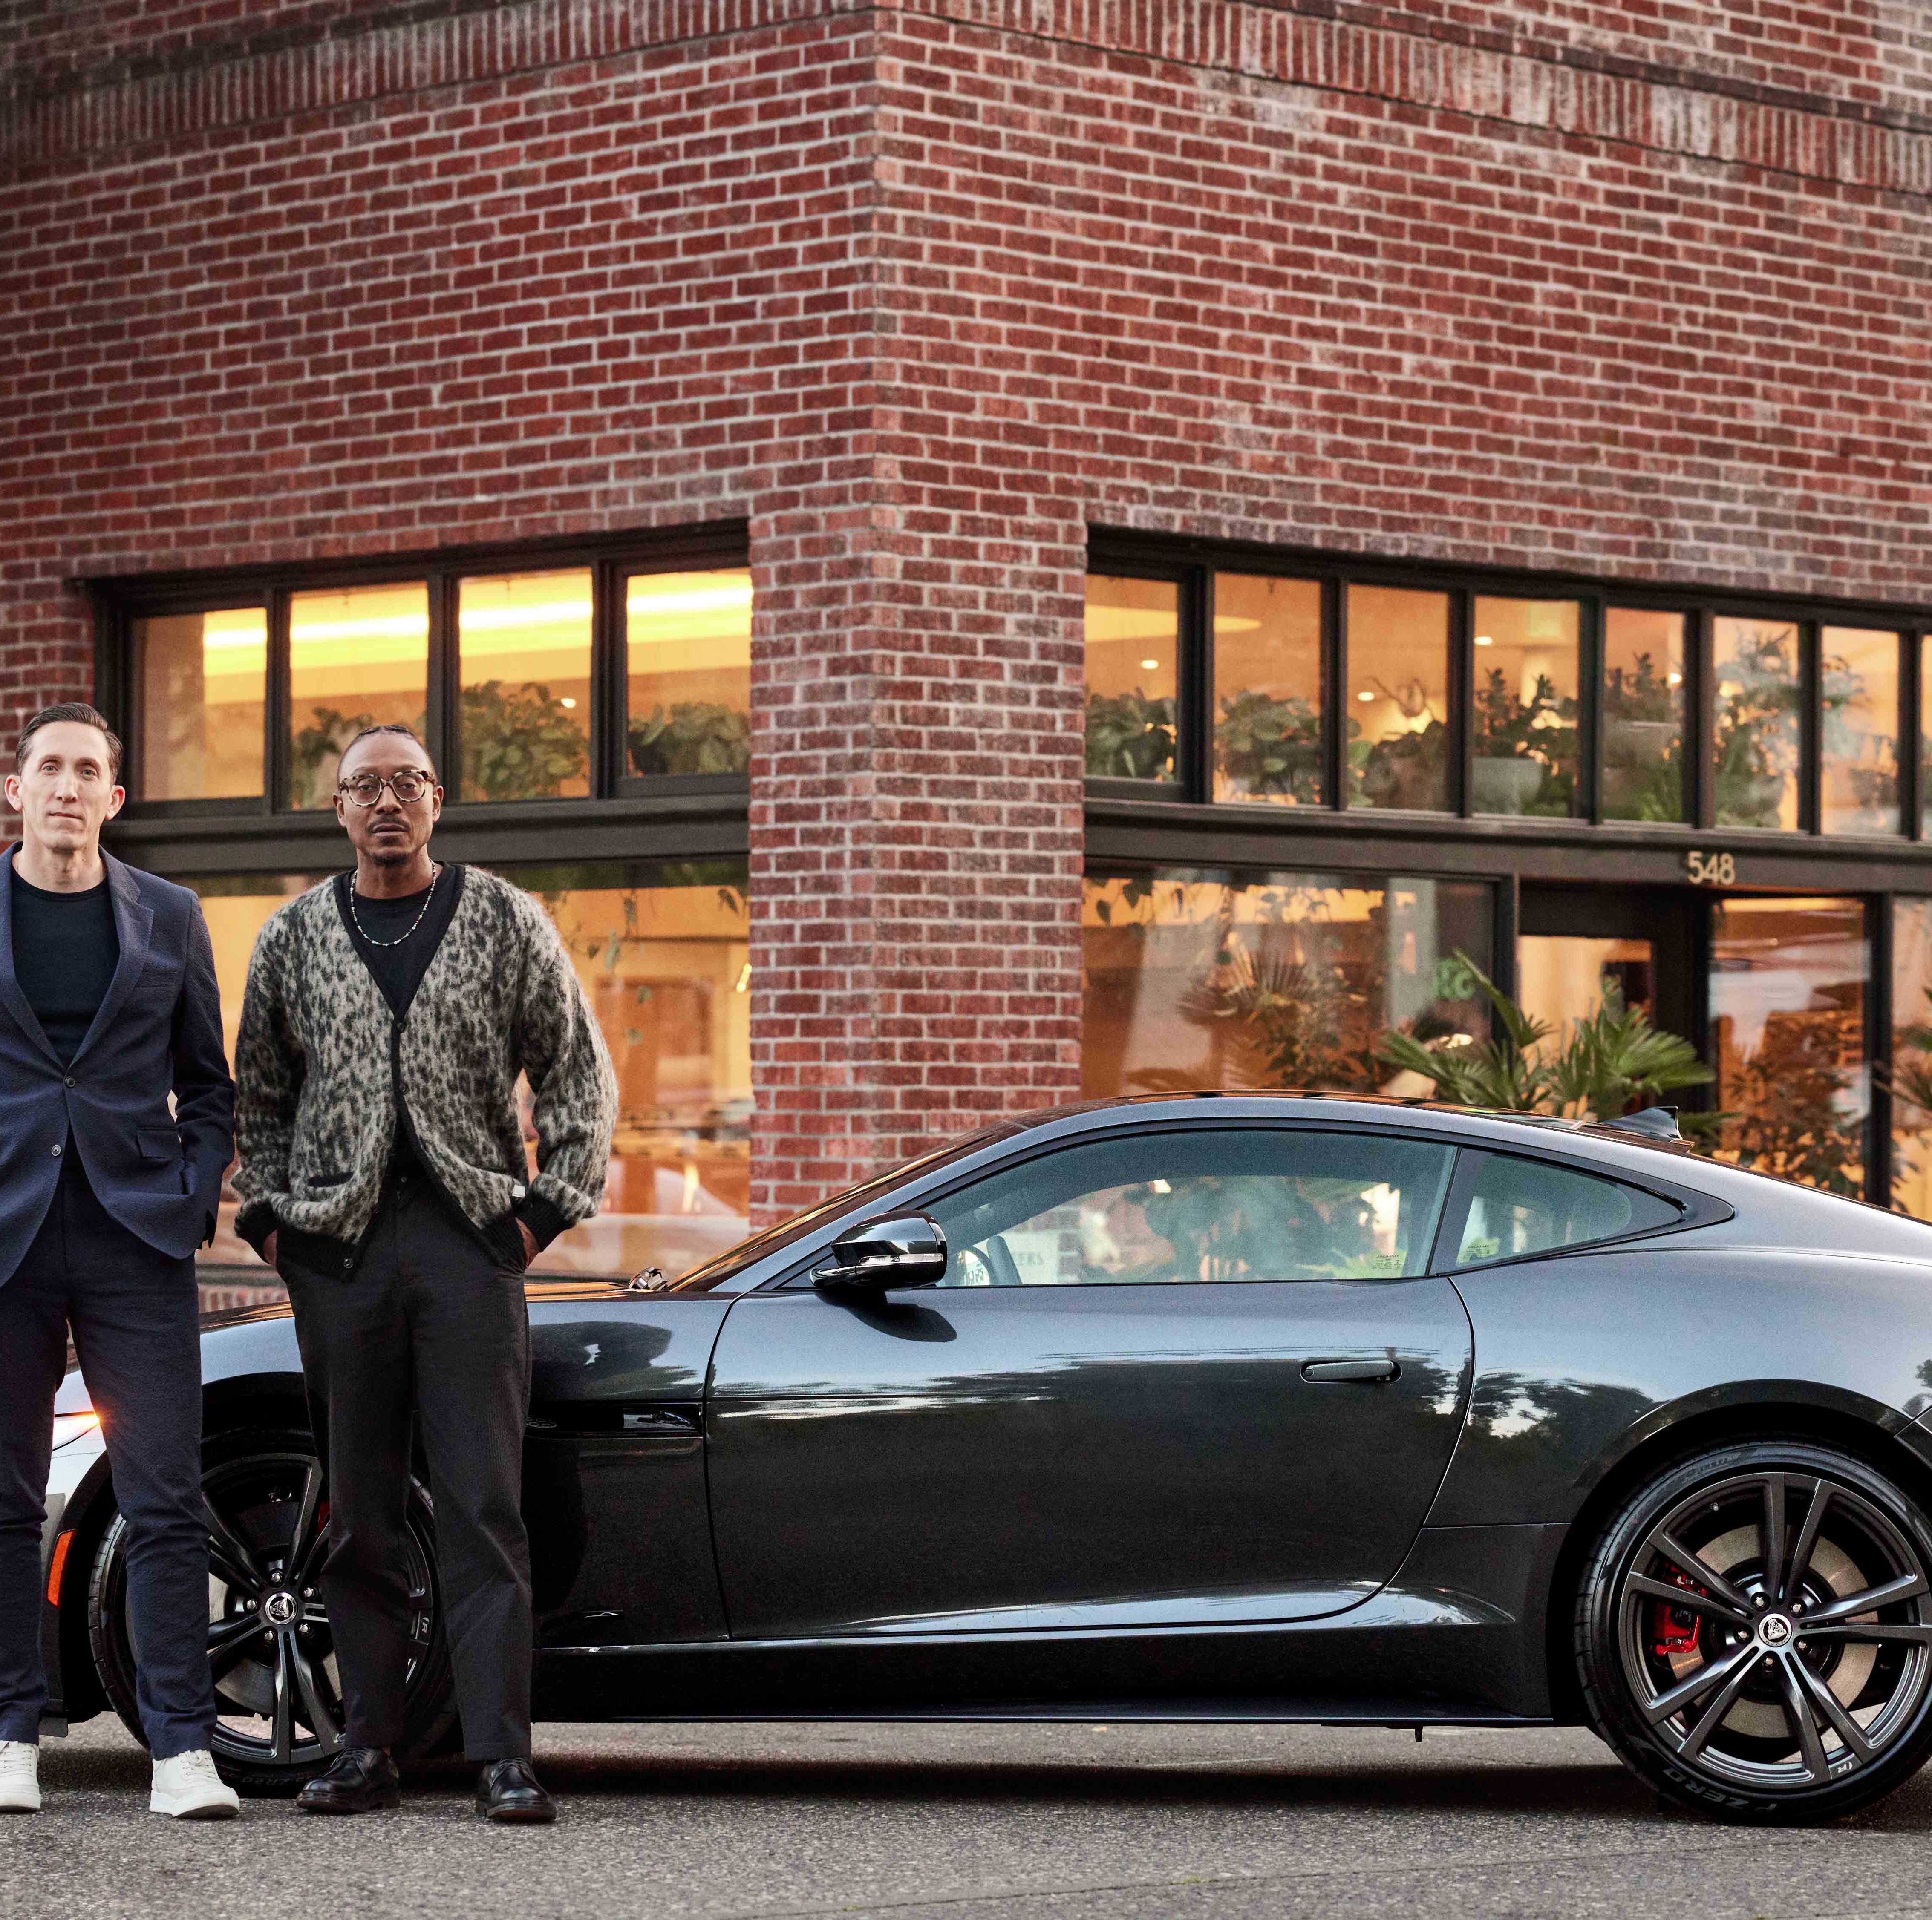 For Jaguar TCS Racing's James Barclay and Chef Gregory Gourdet, It's All About Excellence